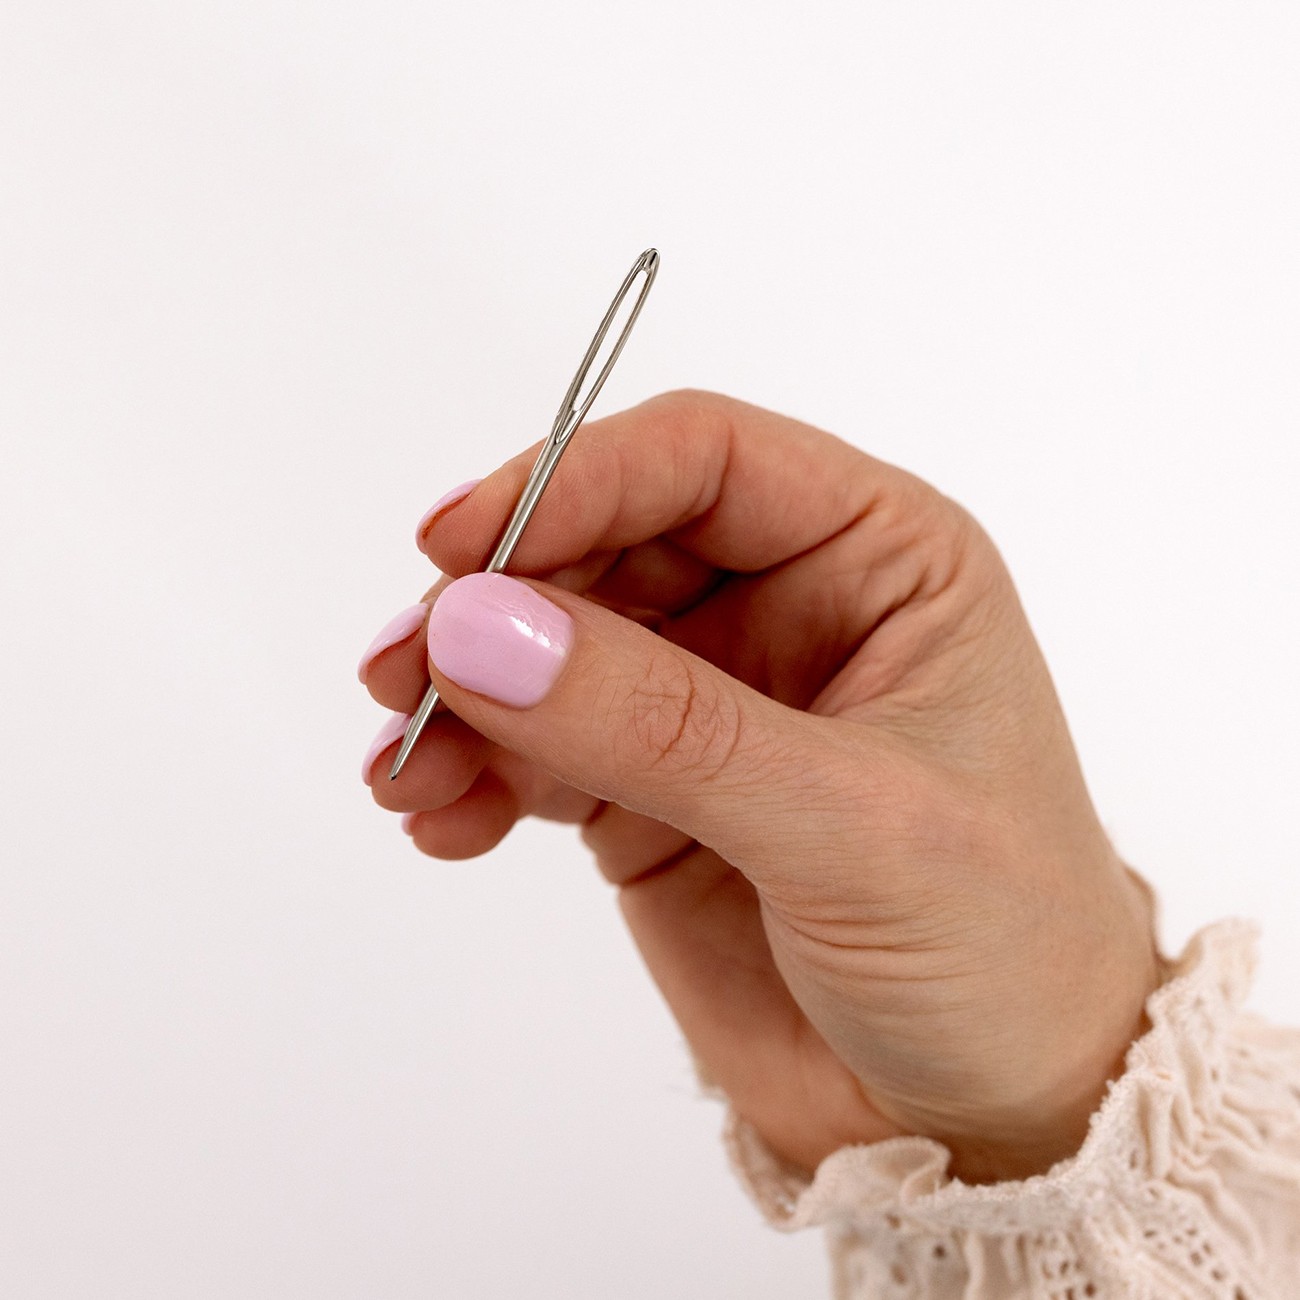 A hand holds a weaving needle.